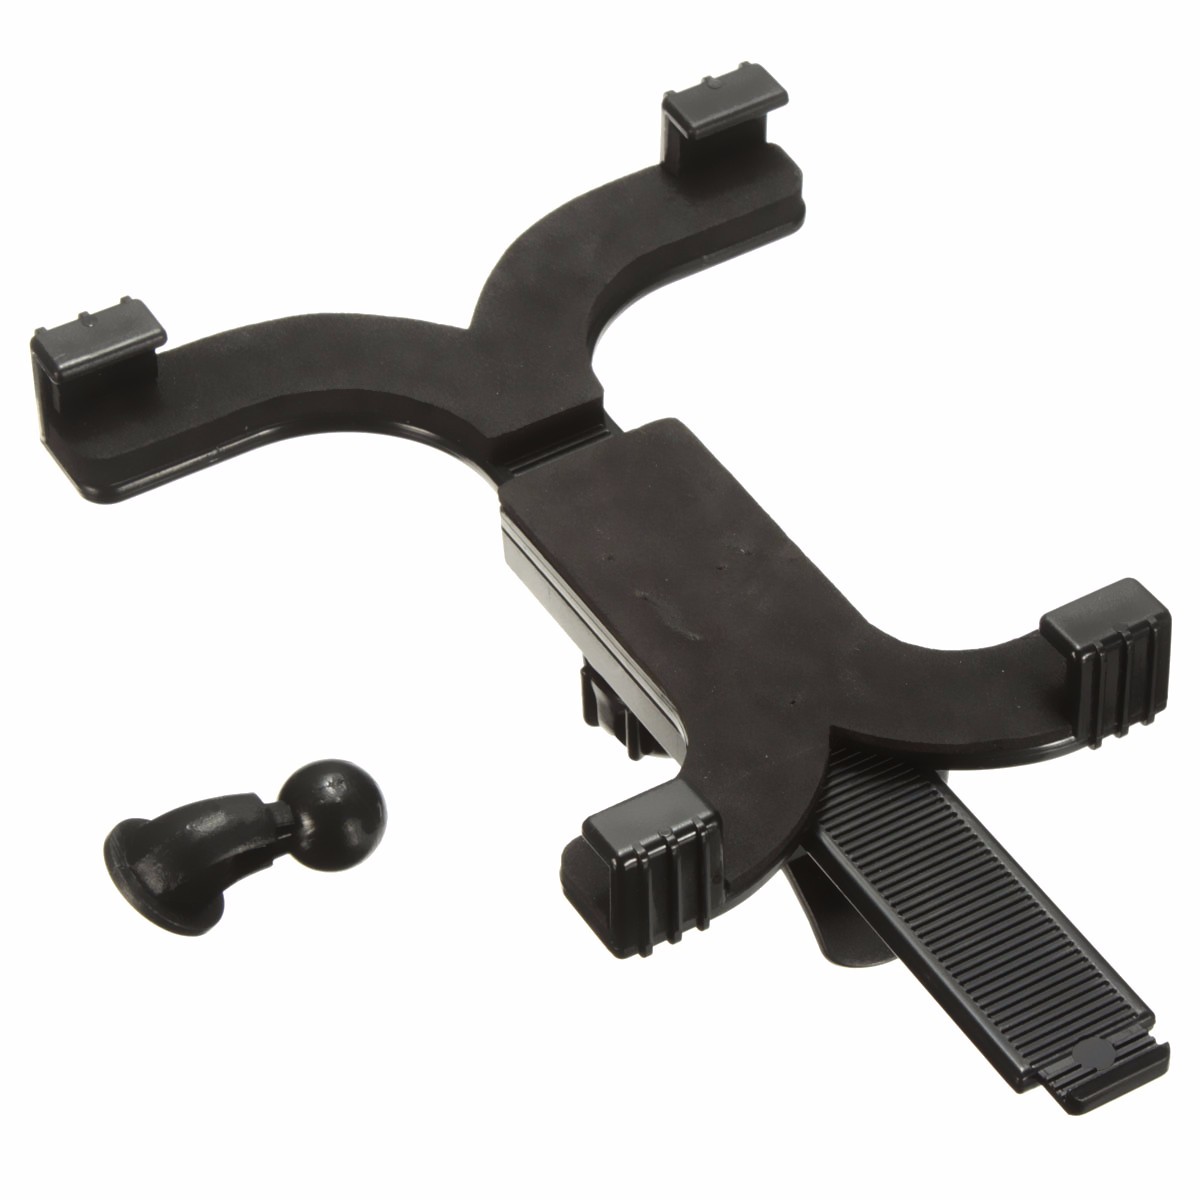 Self-Stick-Tripod-Stand-Holder-Tablet-Bracket-Accessories-For-7-To-11-Inch-for-iPad-for-iPod-Tablet-1047201-10